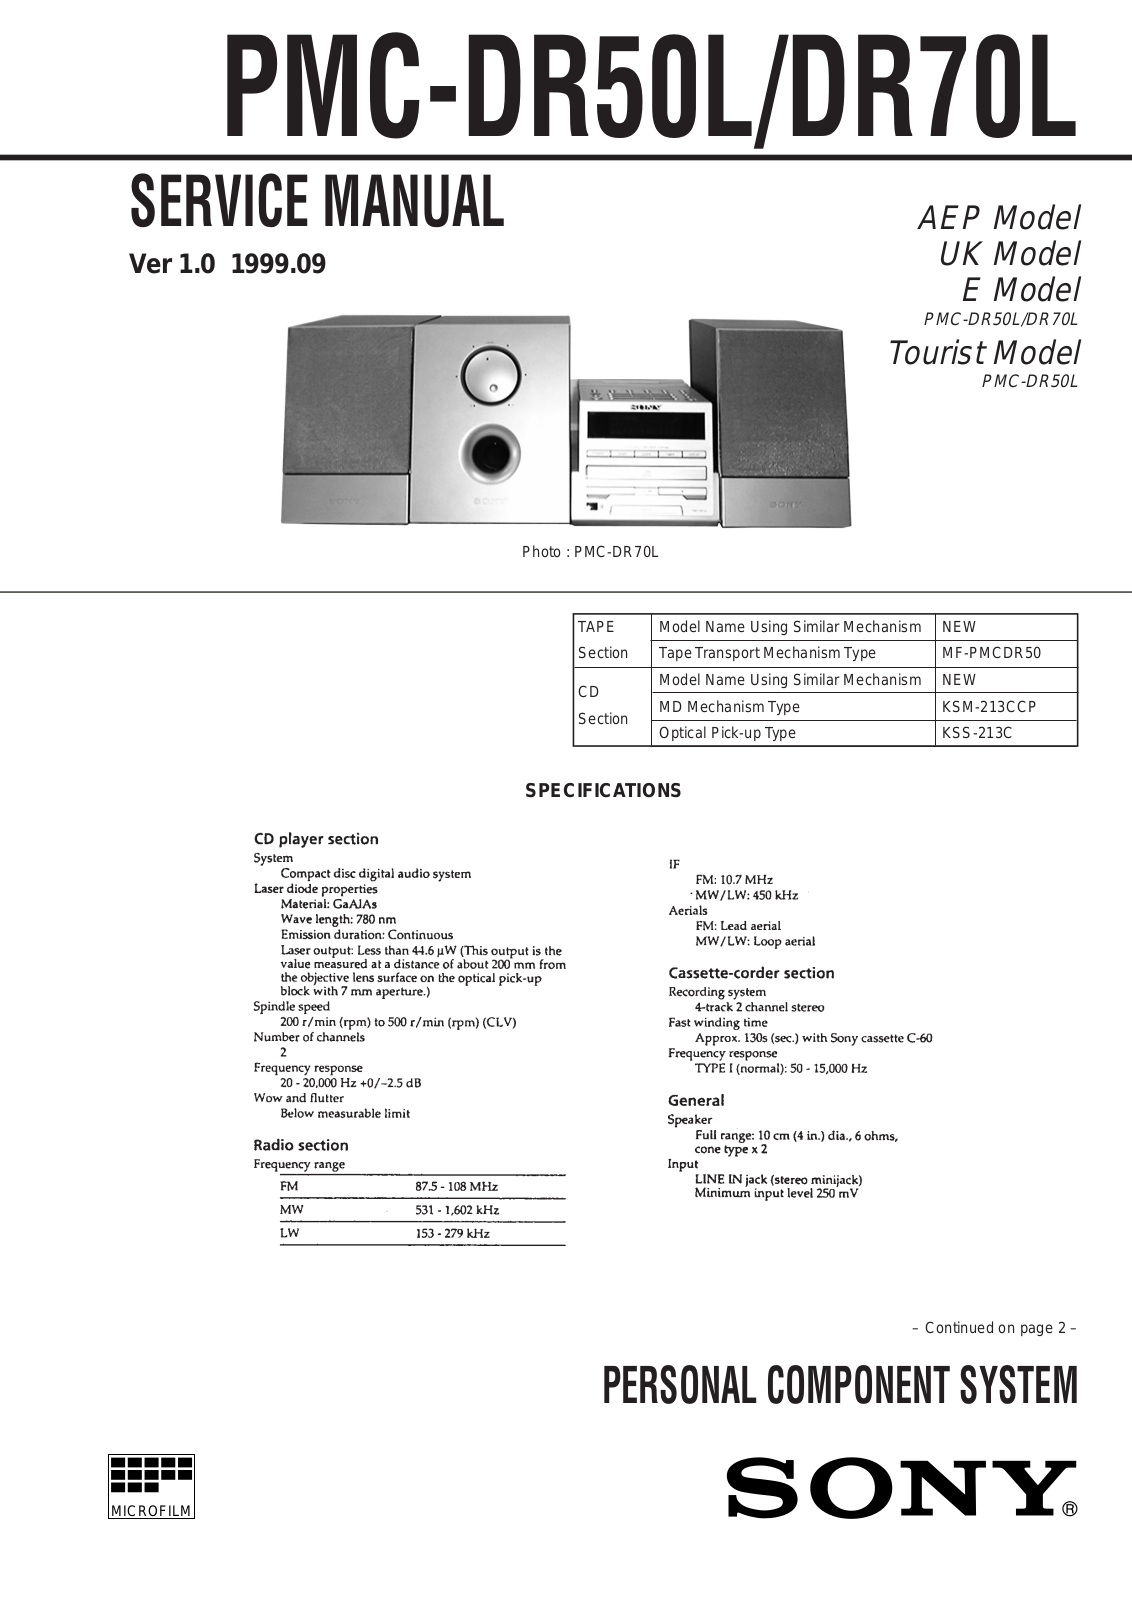 SONY PMC-DR50L, PMC-DR70L Service Manual